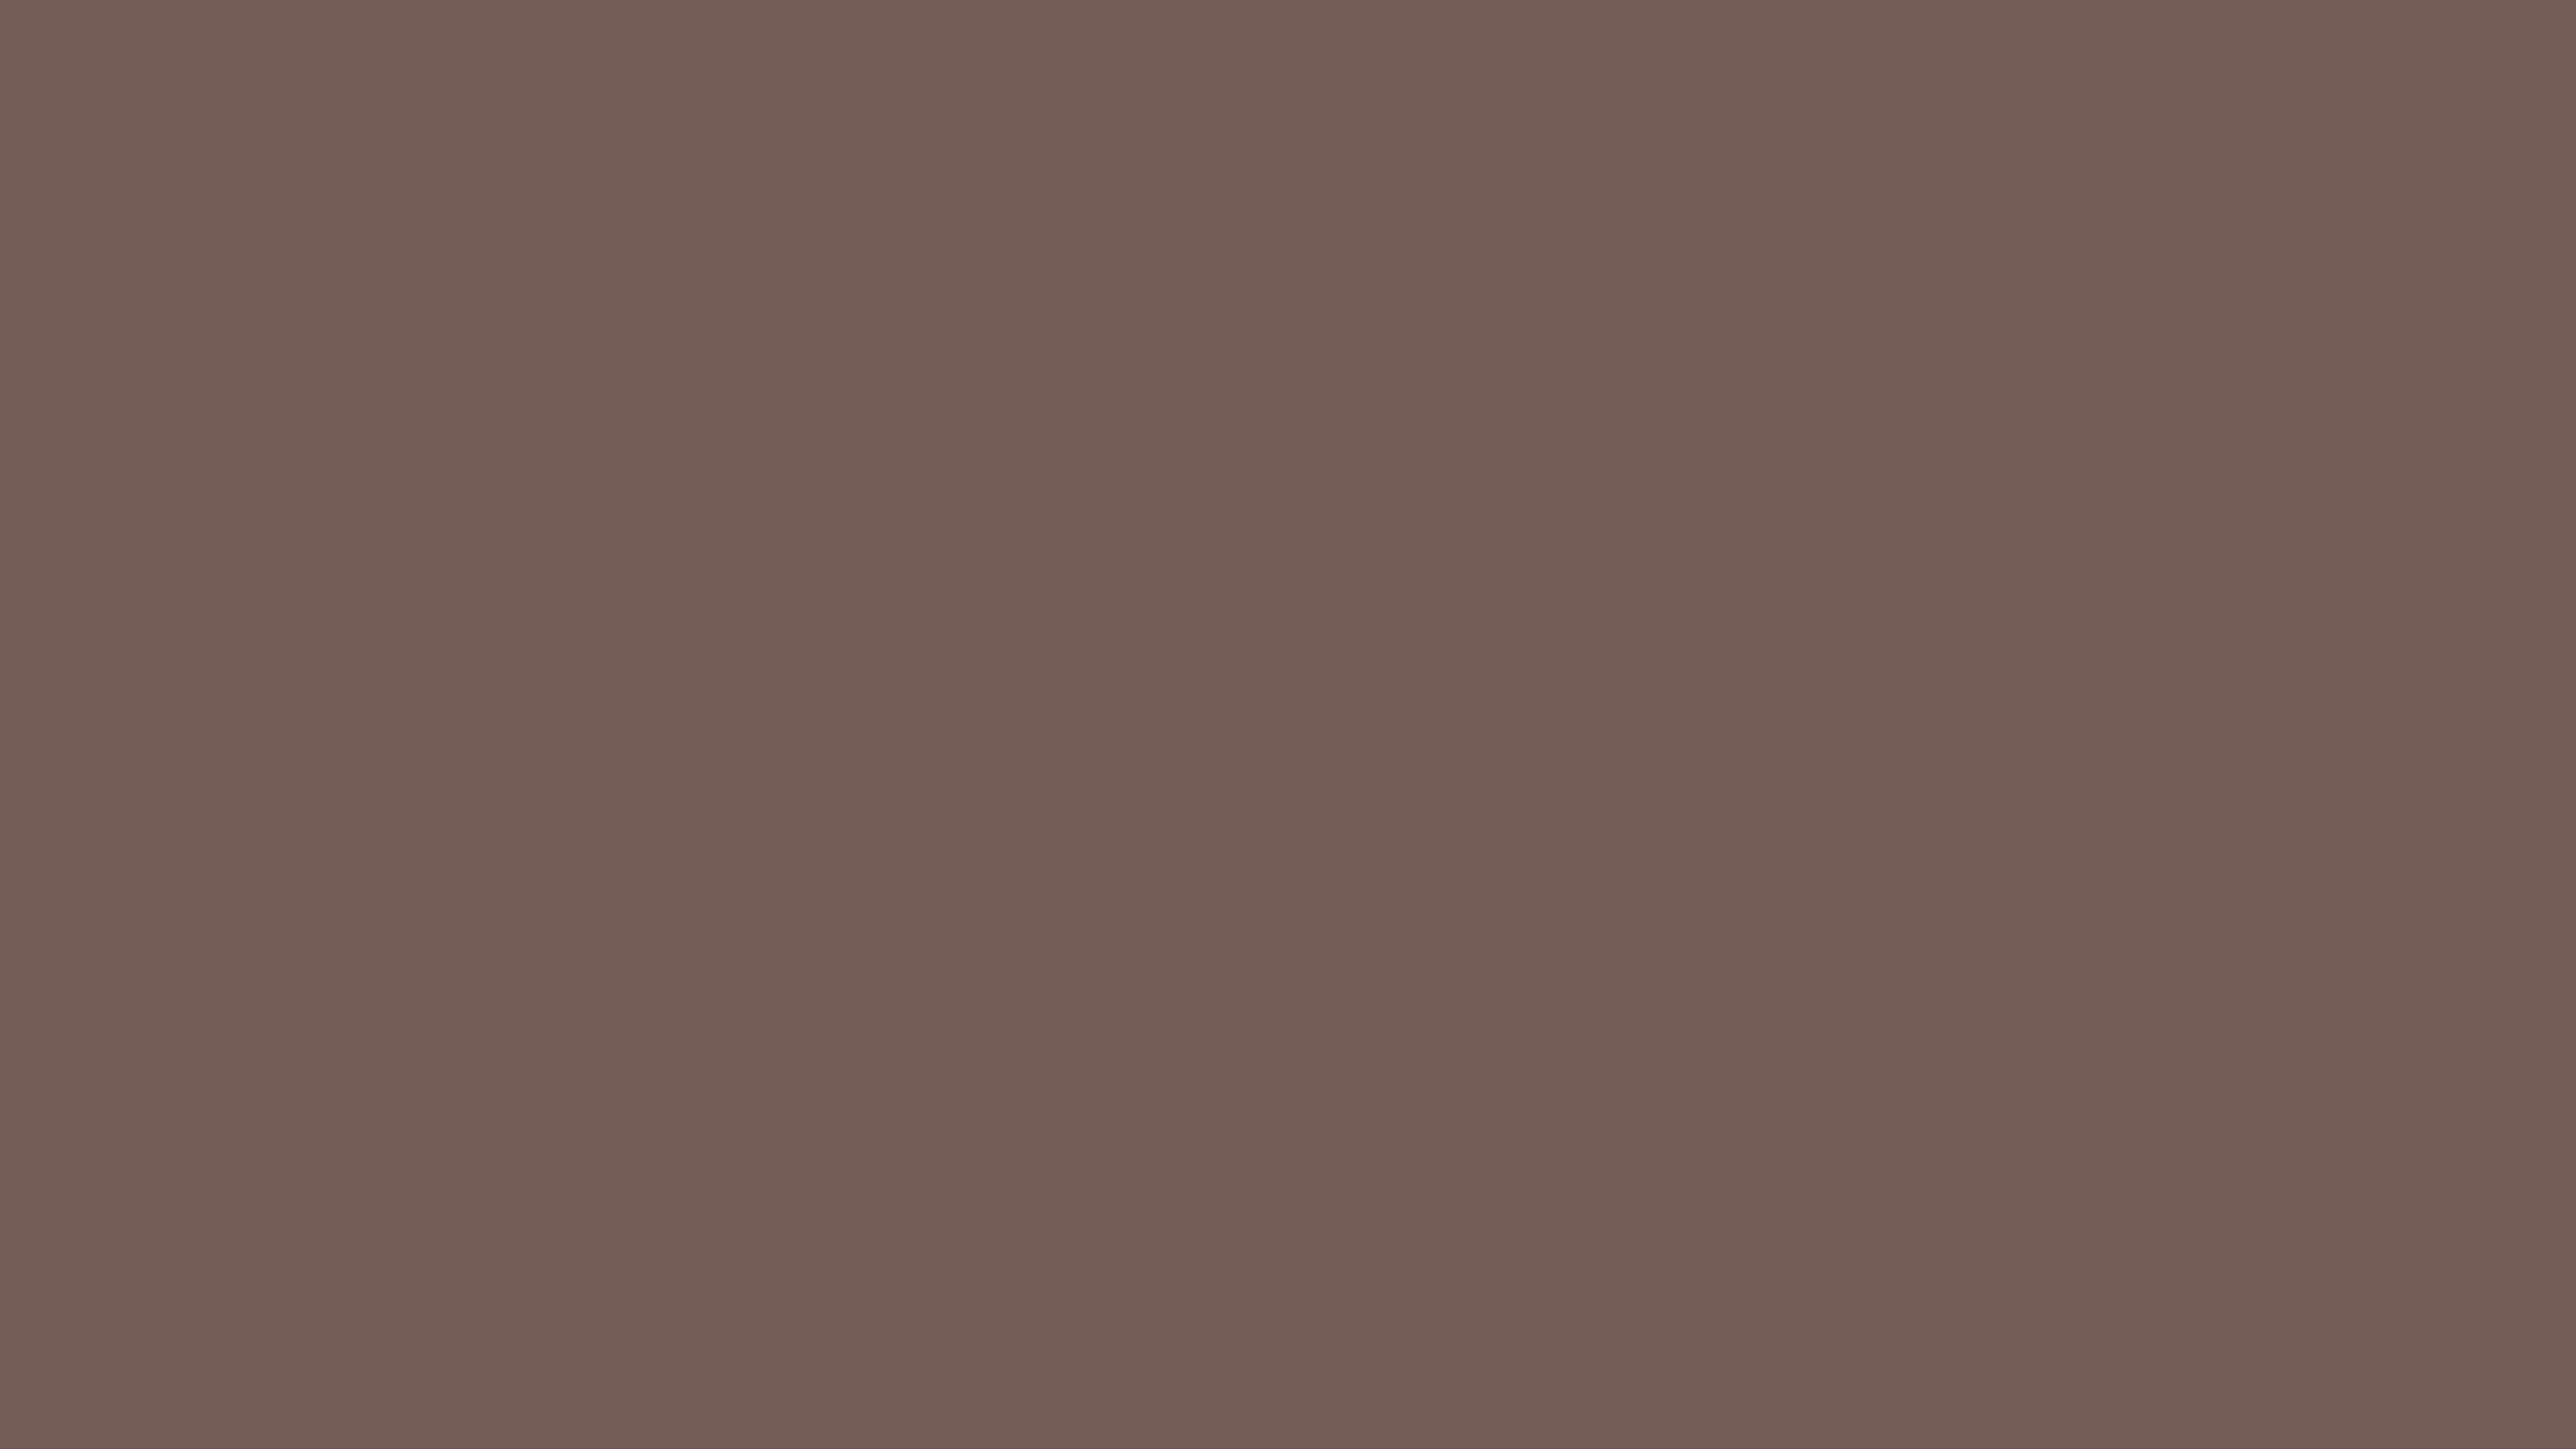 Pantone 18-1312 TPX Deep Taupe Precisely Matched For Spray Paint